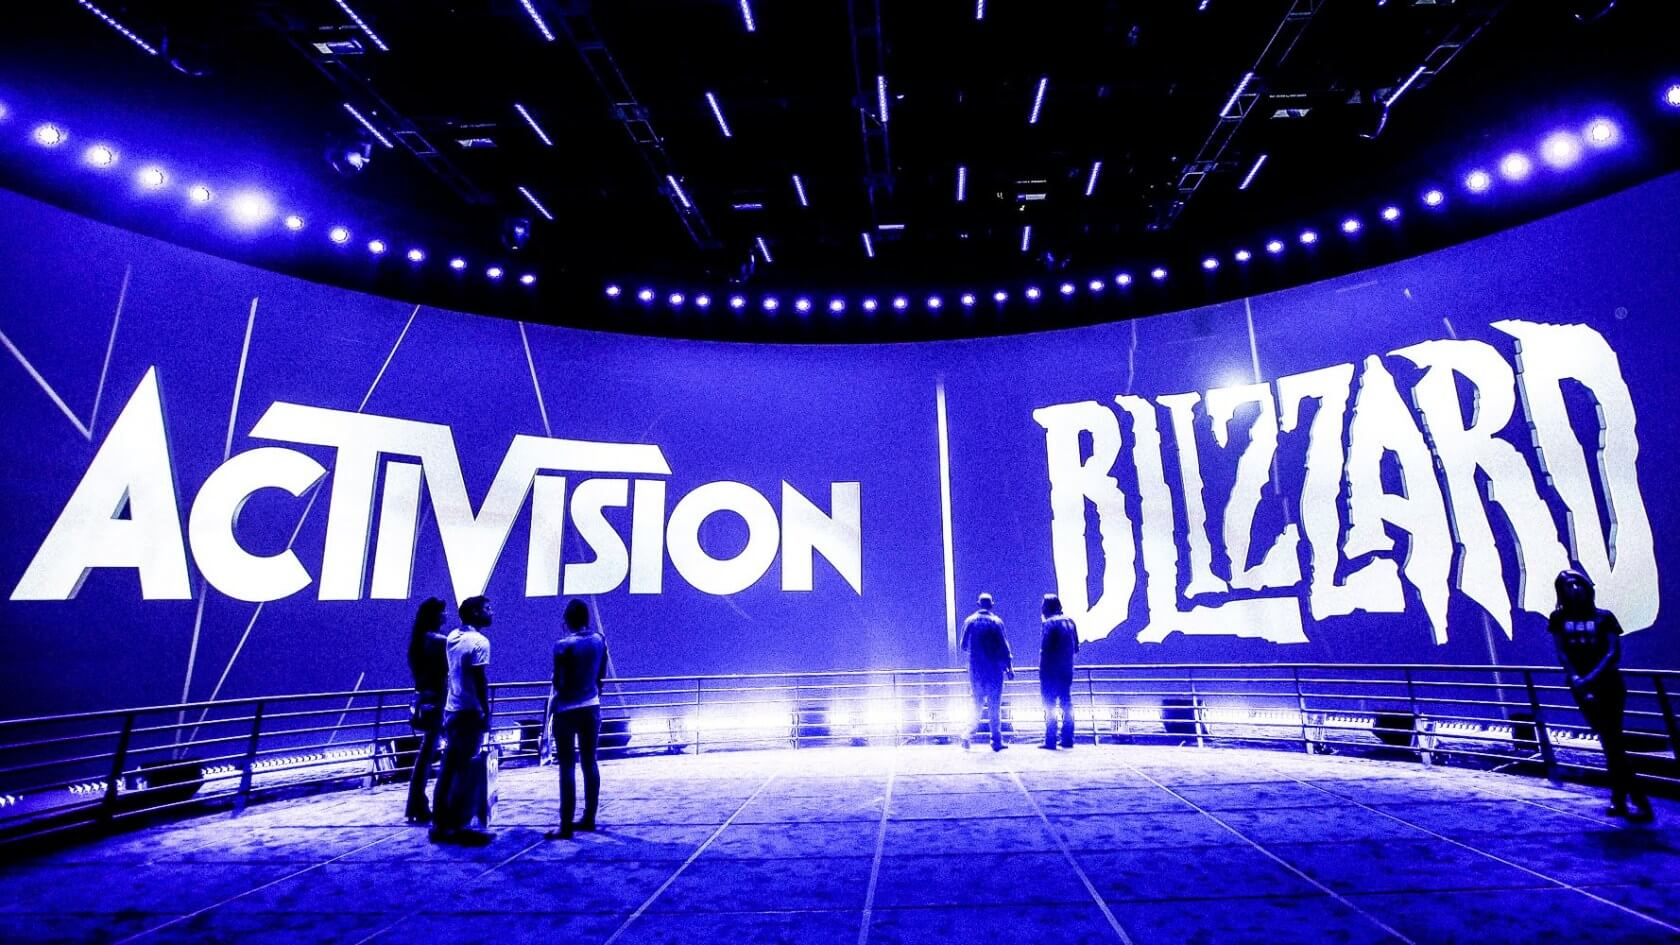 Activision Blizzard is laying off 775 people, or about 8% of its workforce